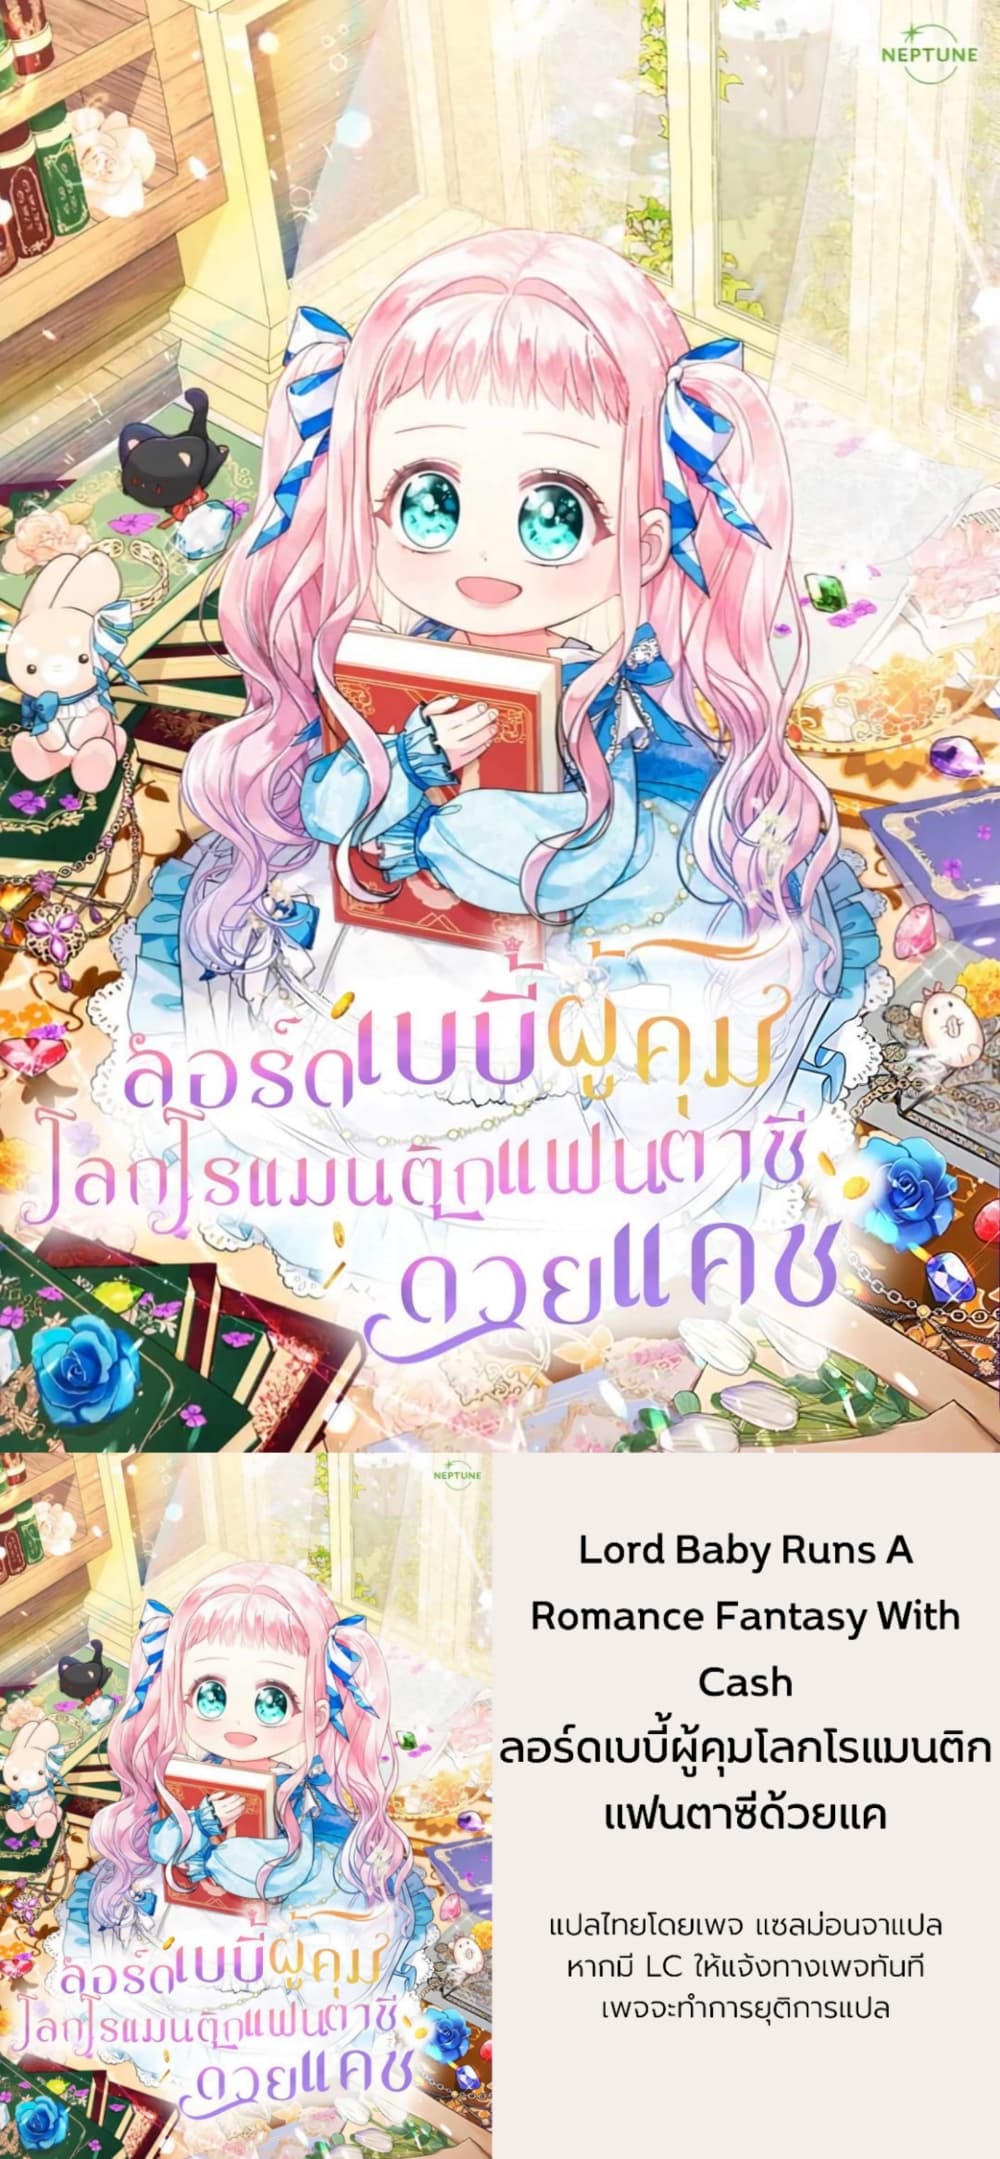 Lord Baby Runs a Romance Fantasy With Cash 12-12